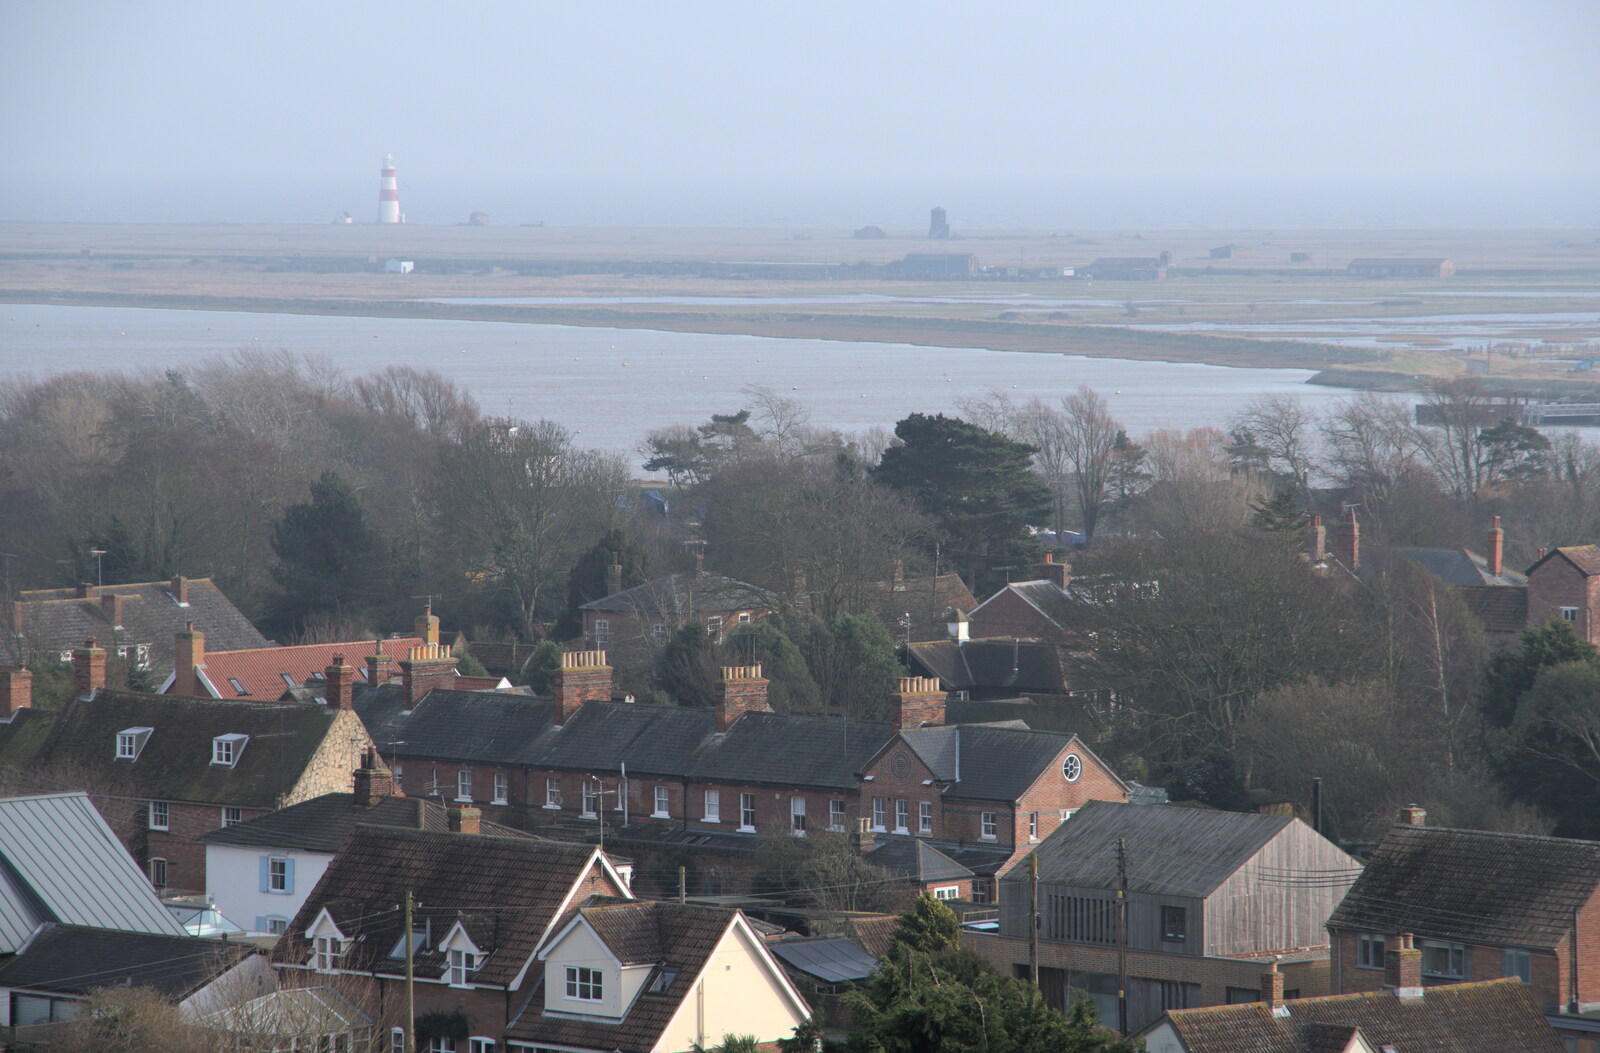 A Trip to Orford, Suffolk - 25th January 2020: The view to Orford Ness